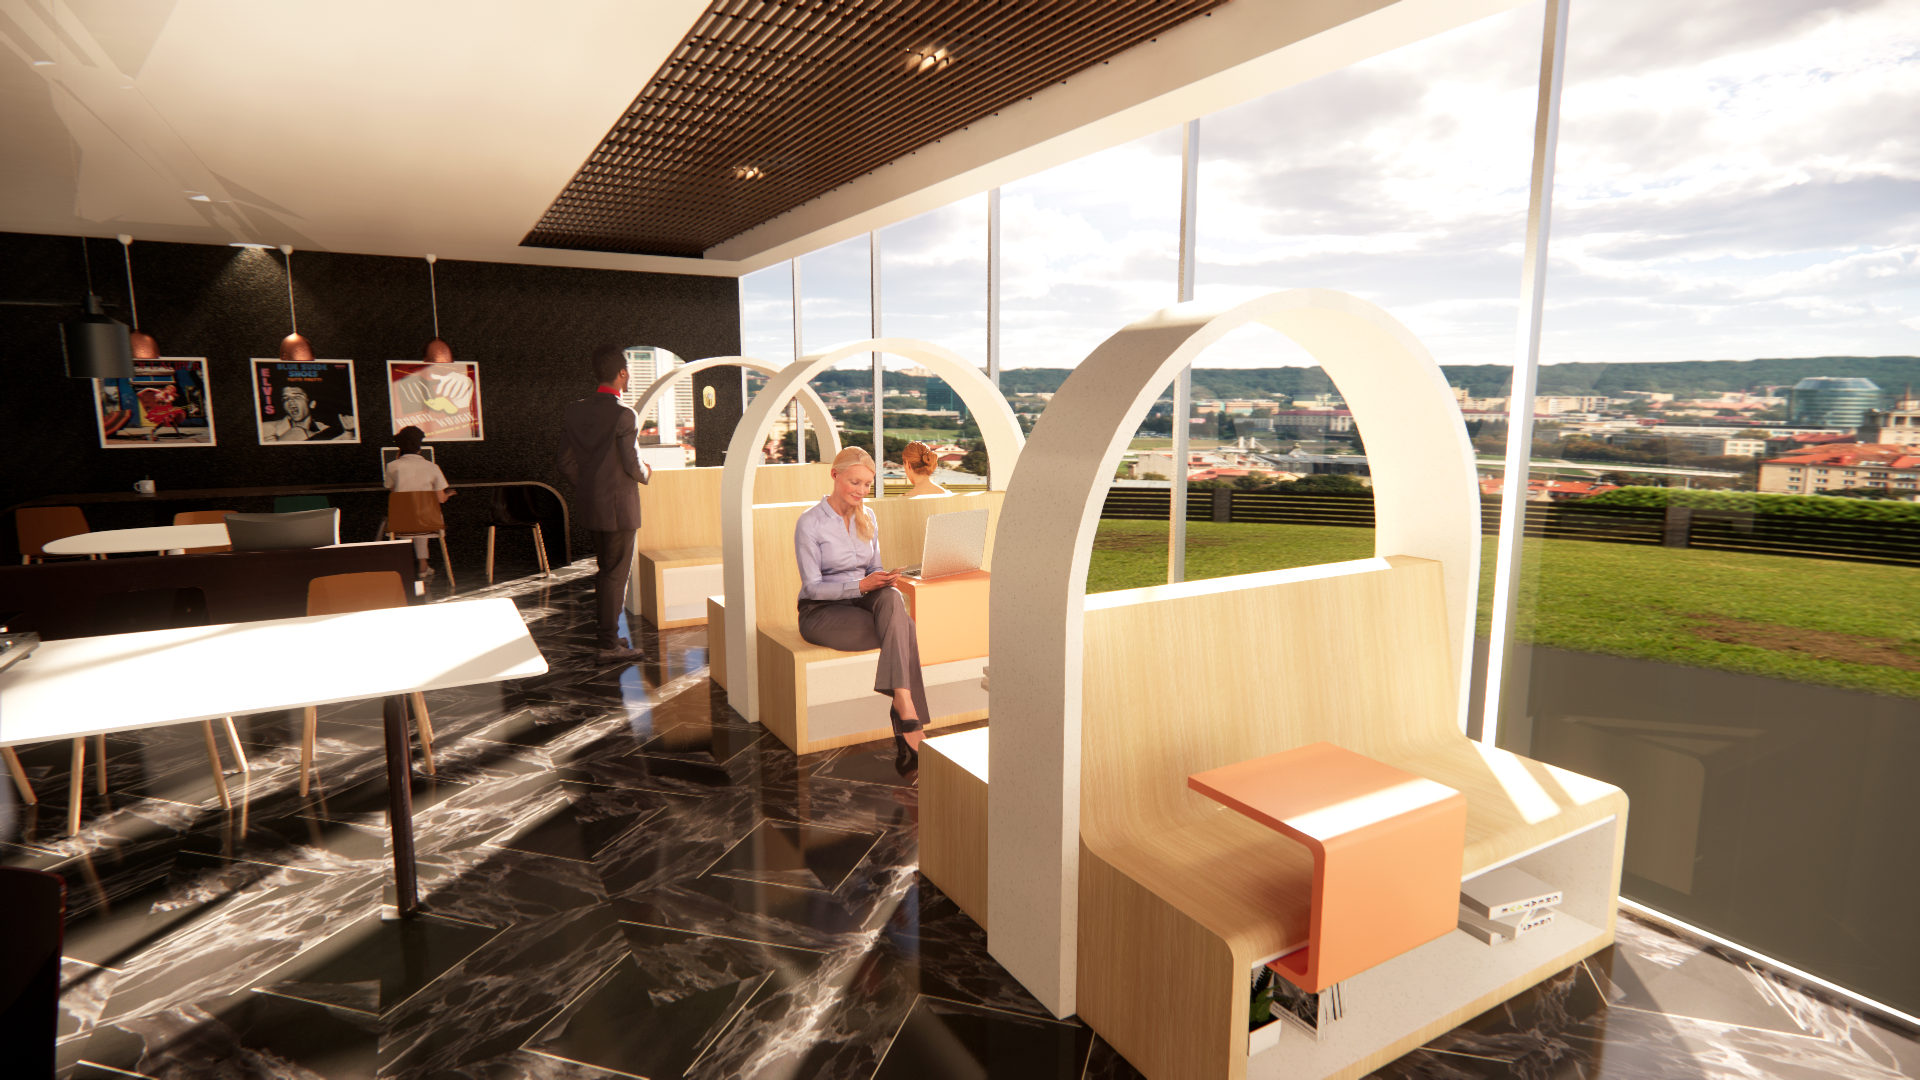 Rendering of a custom furniture design of a double sided booth with an arch overhead.